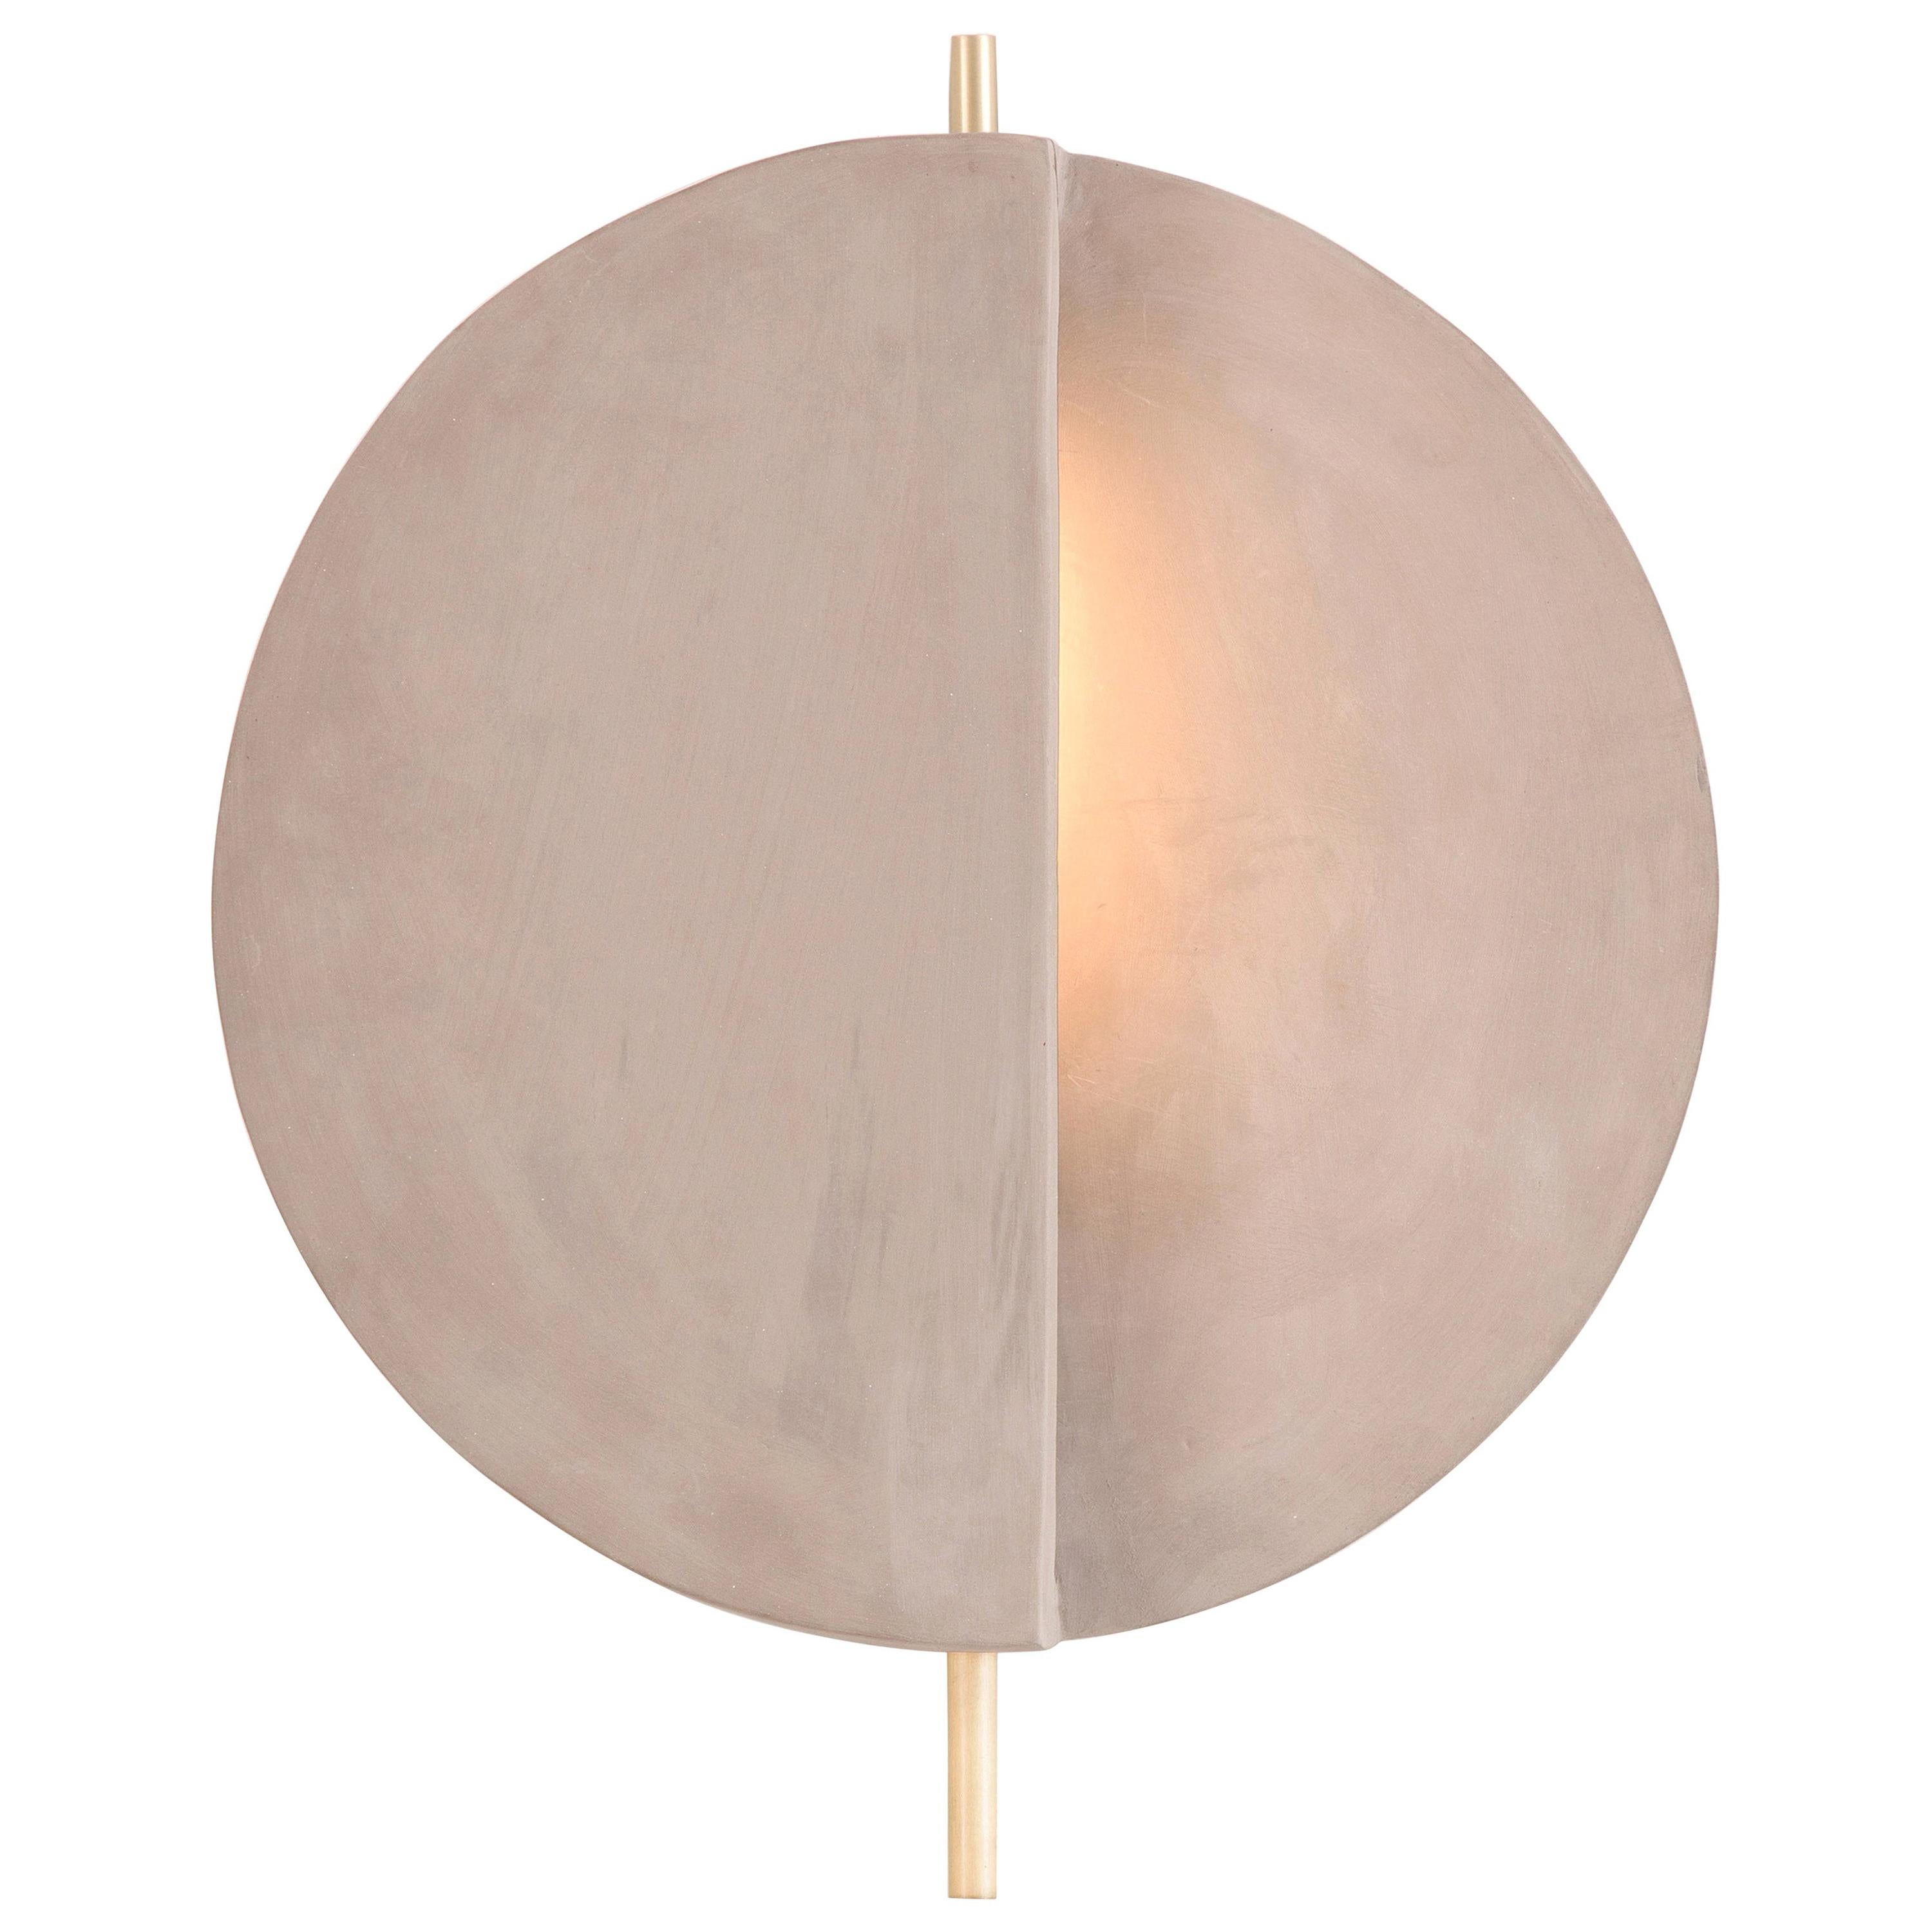 Handmade Minimalist Geometric wall light enhances the beauty of slowliness into daily process and the raw beauty of Brazil's natural landscapes. 
 
85g is our raw minimalist wall light, handmade and inspired by the serene beauty of Brazil's